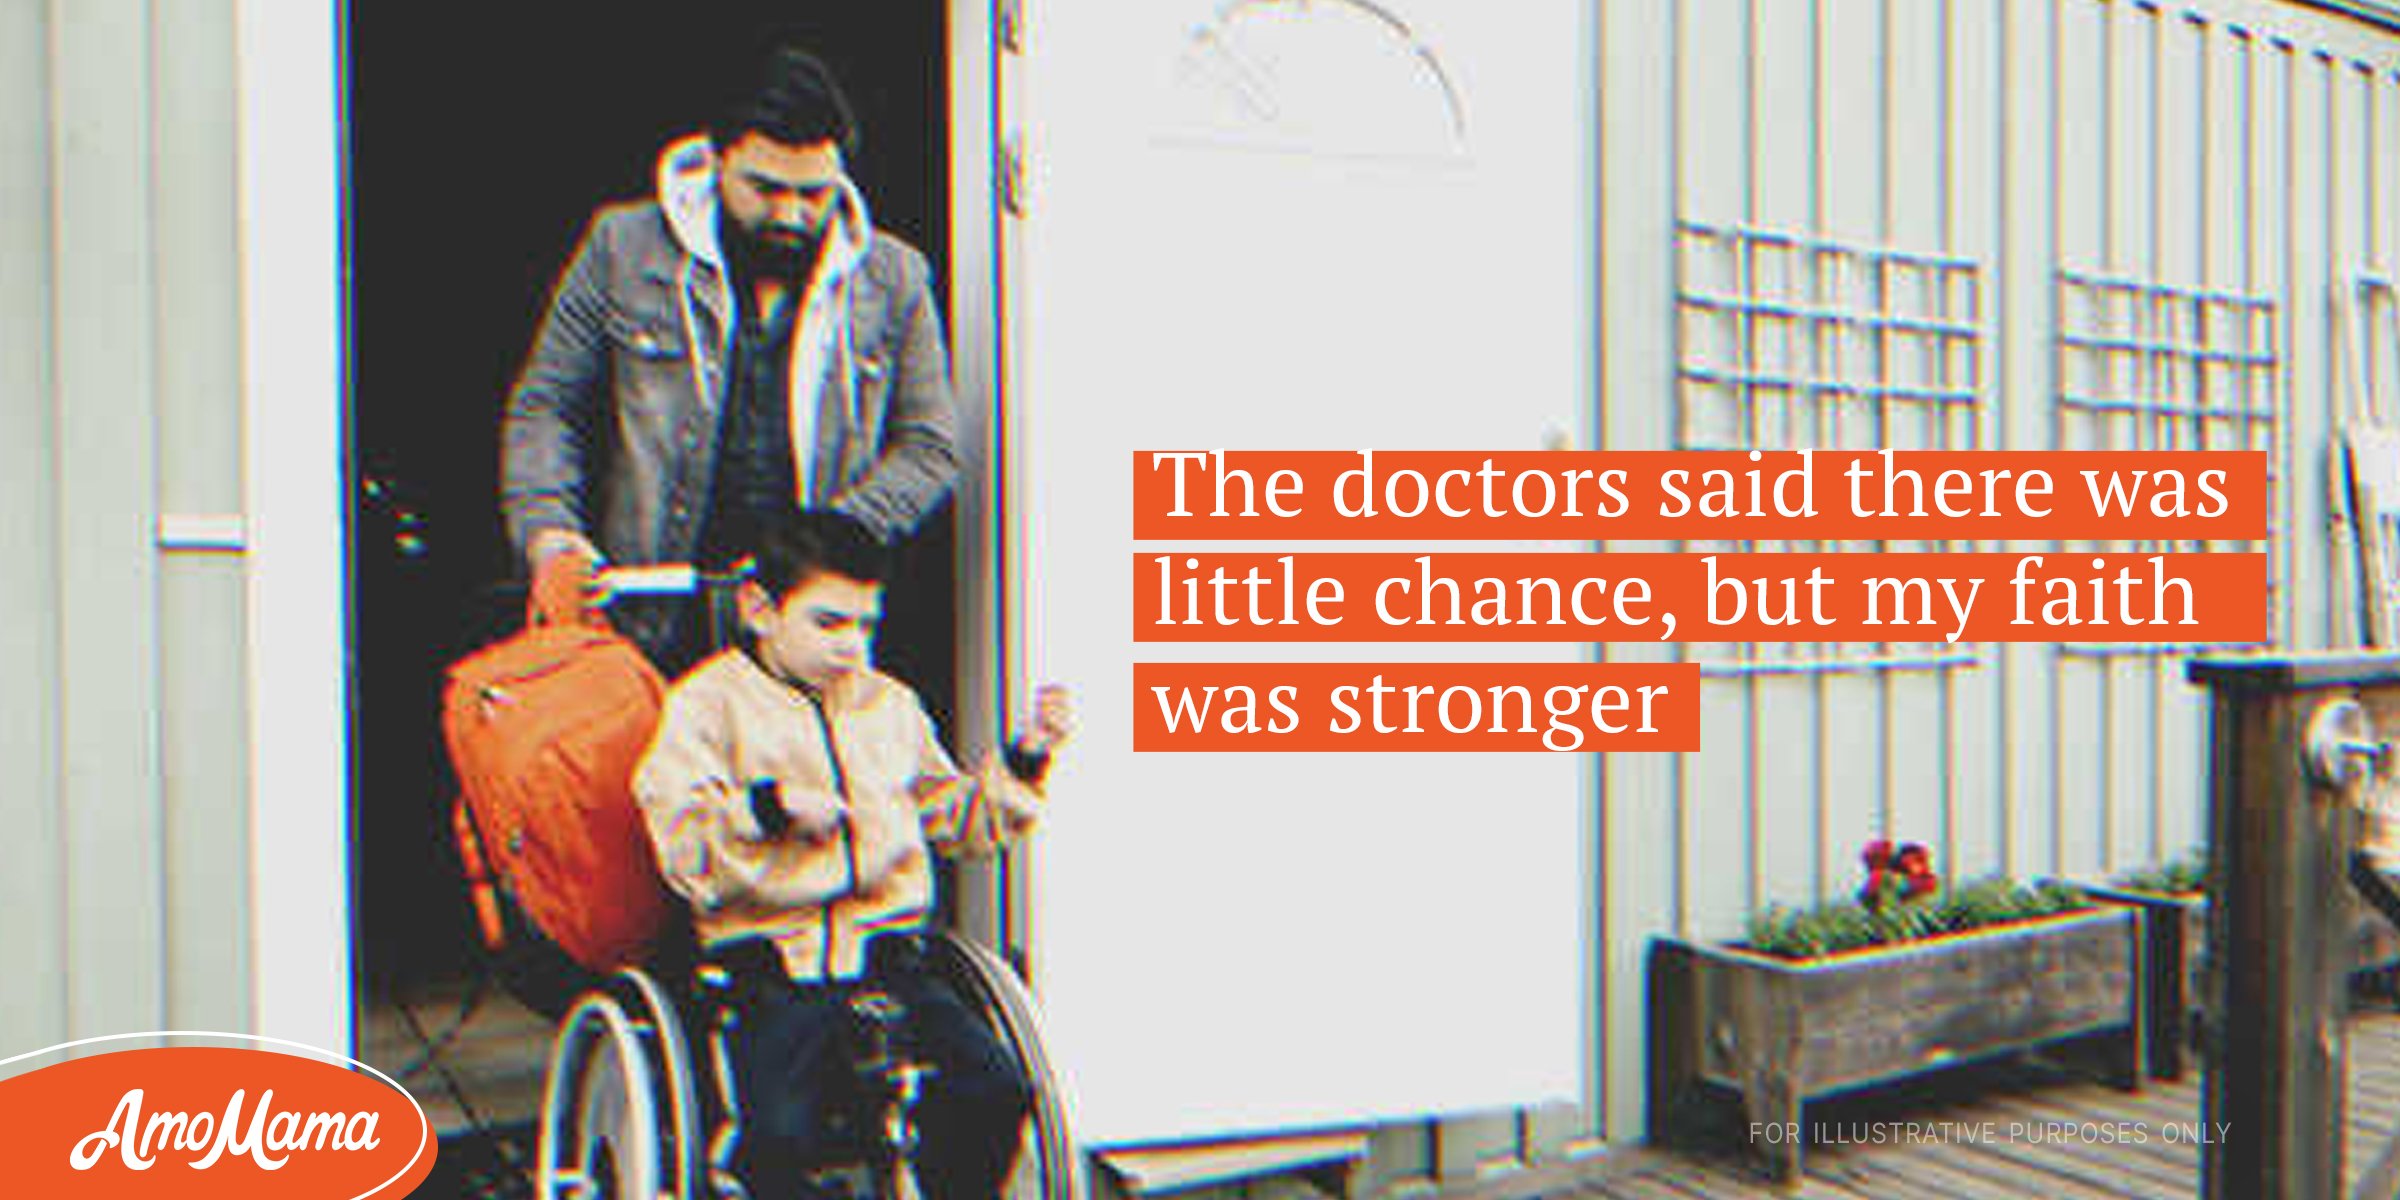 Single Dad Works 17 Hours a Day to Give Son Chance to Walk Again — Story of the Day